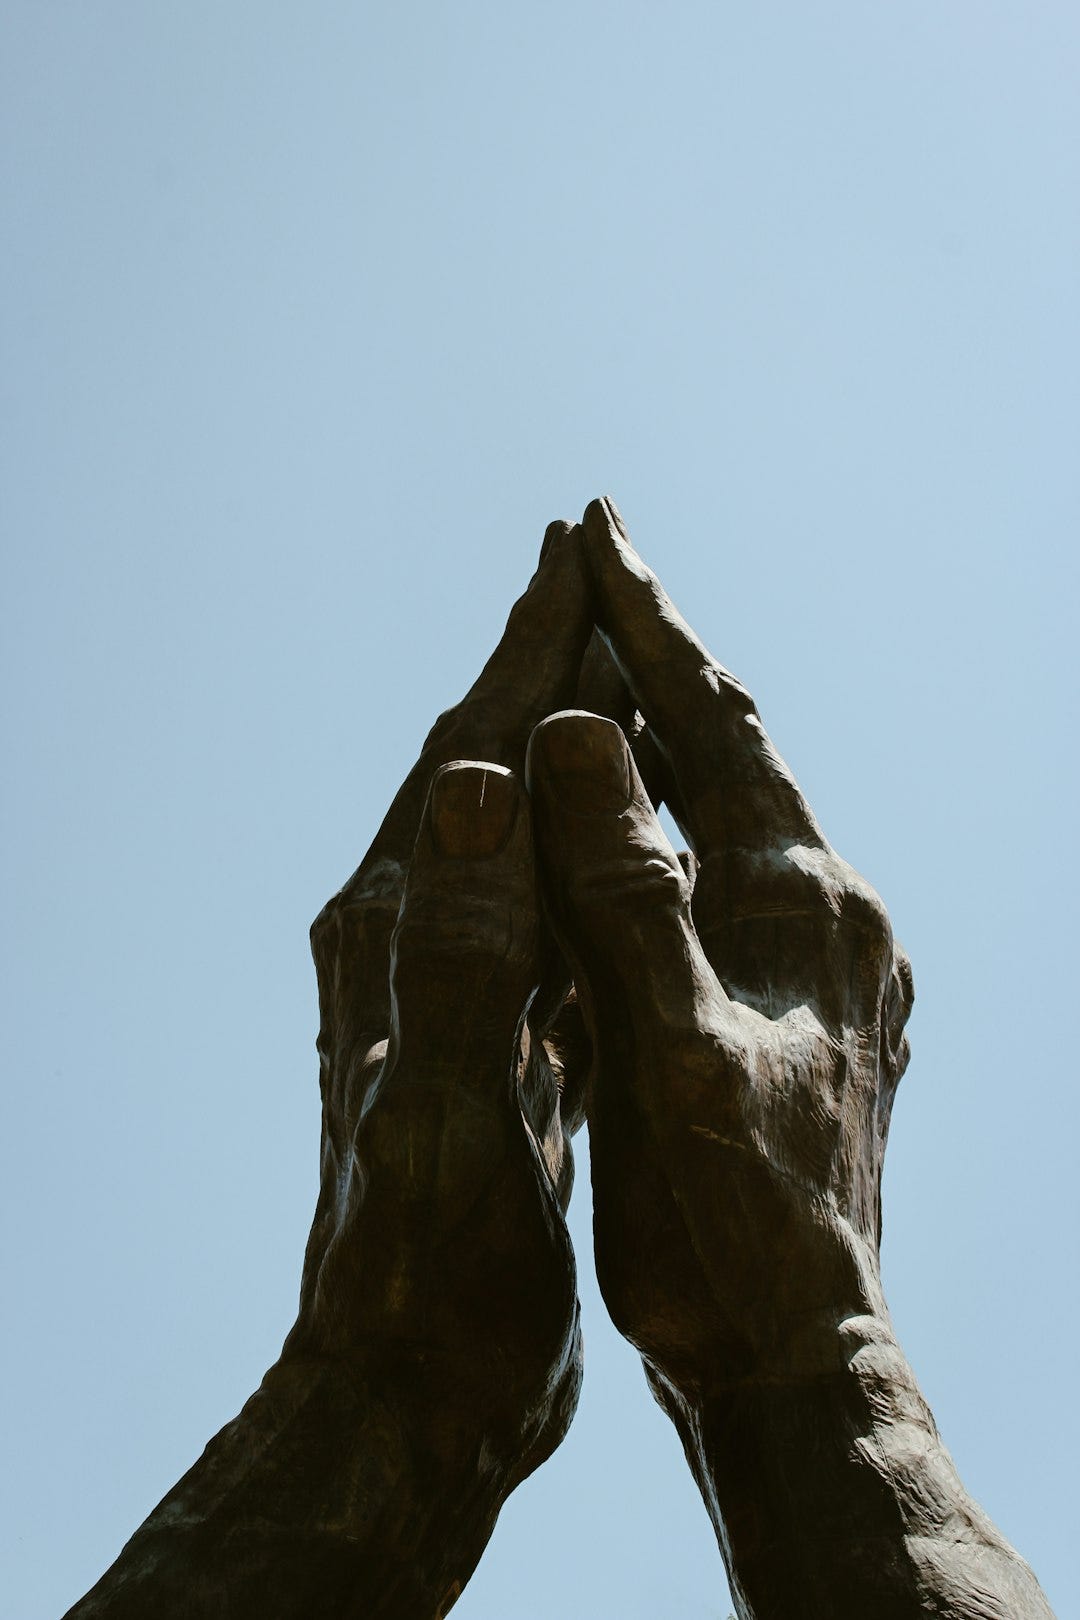 a statue of two hands reaching up into the sky